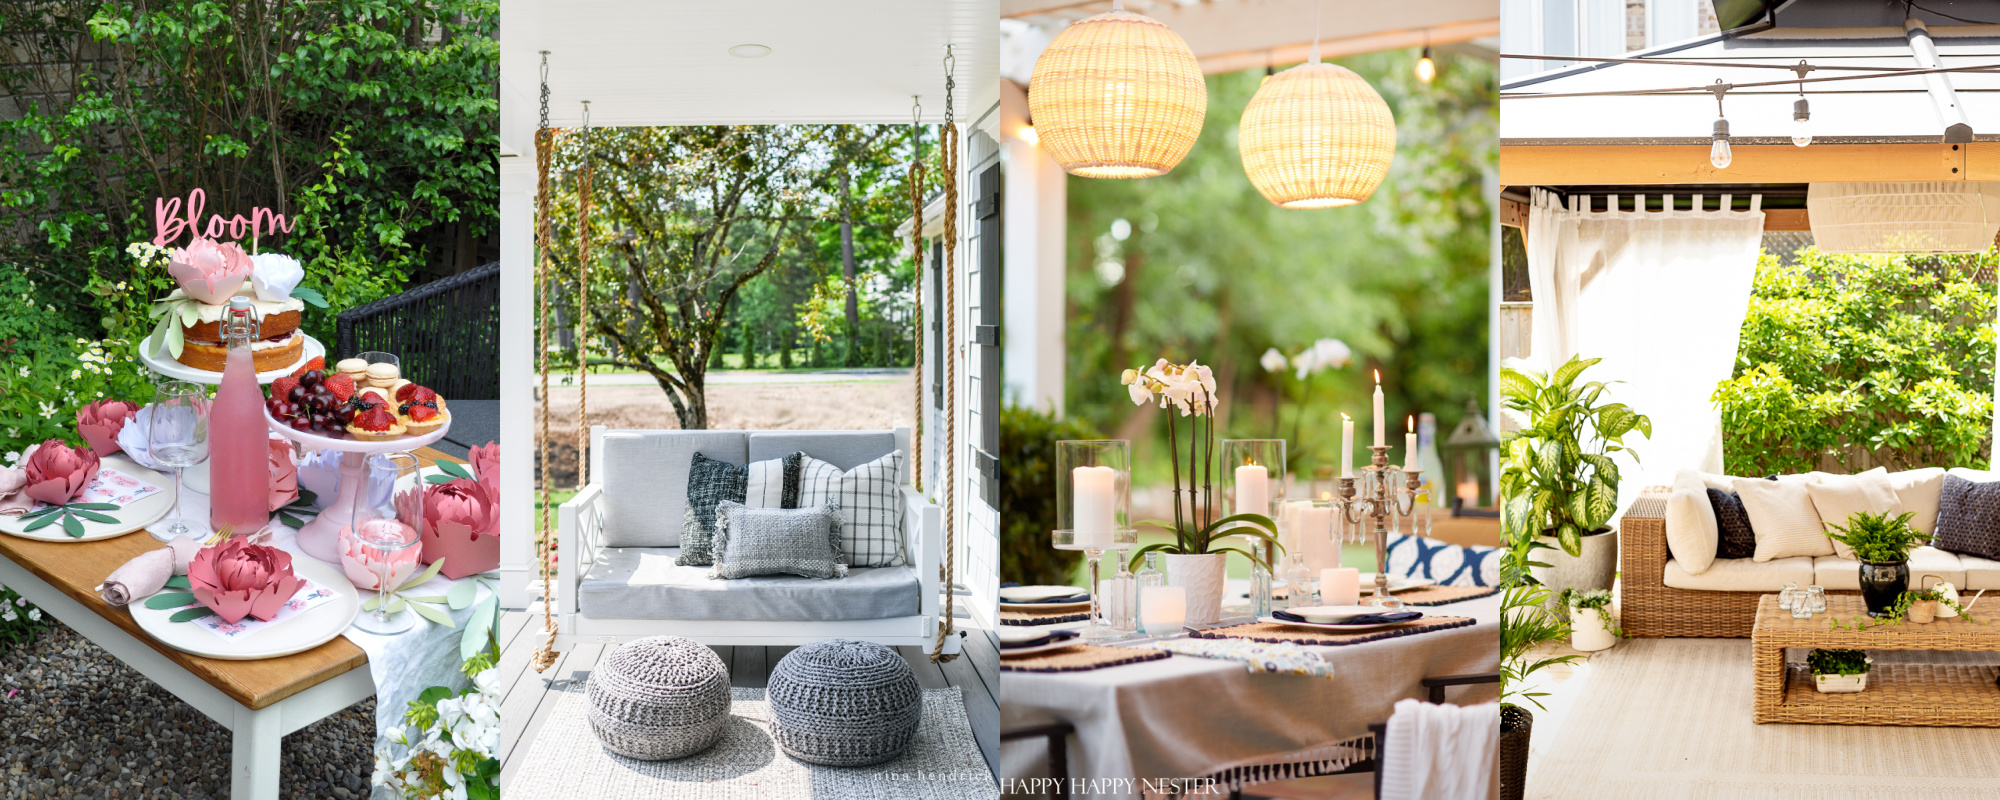  Family Patio Ideas by popular Alabama life and style blog, She Gave It A Go: collage image of a table set with pink desserts, white wooden porch swing with grey cushions, outdoor table set with white pillar candles, white glass dishes, woven placemats, and linen napkins, and patio decorated with bistro lights, wicker furniture with cream cushions and posted plants. 